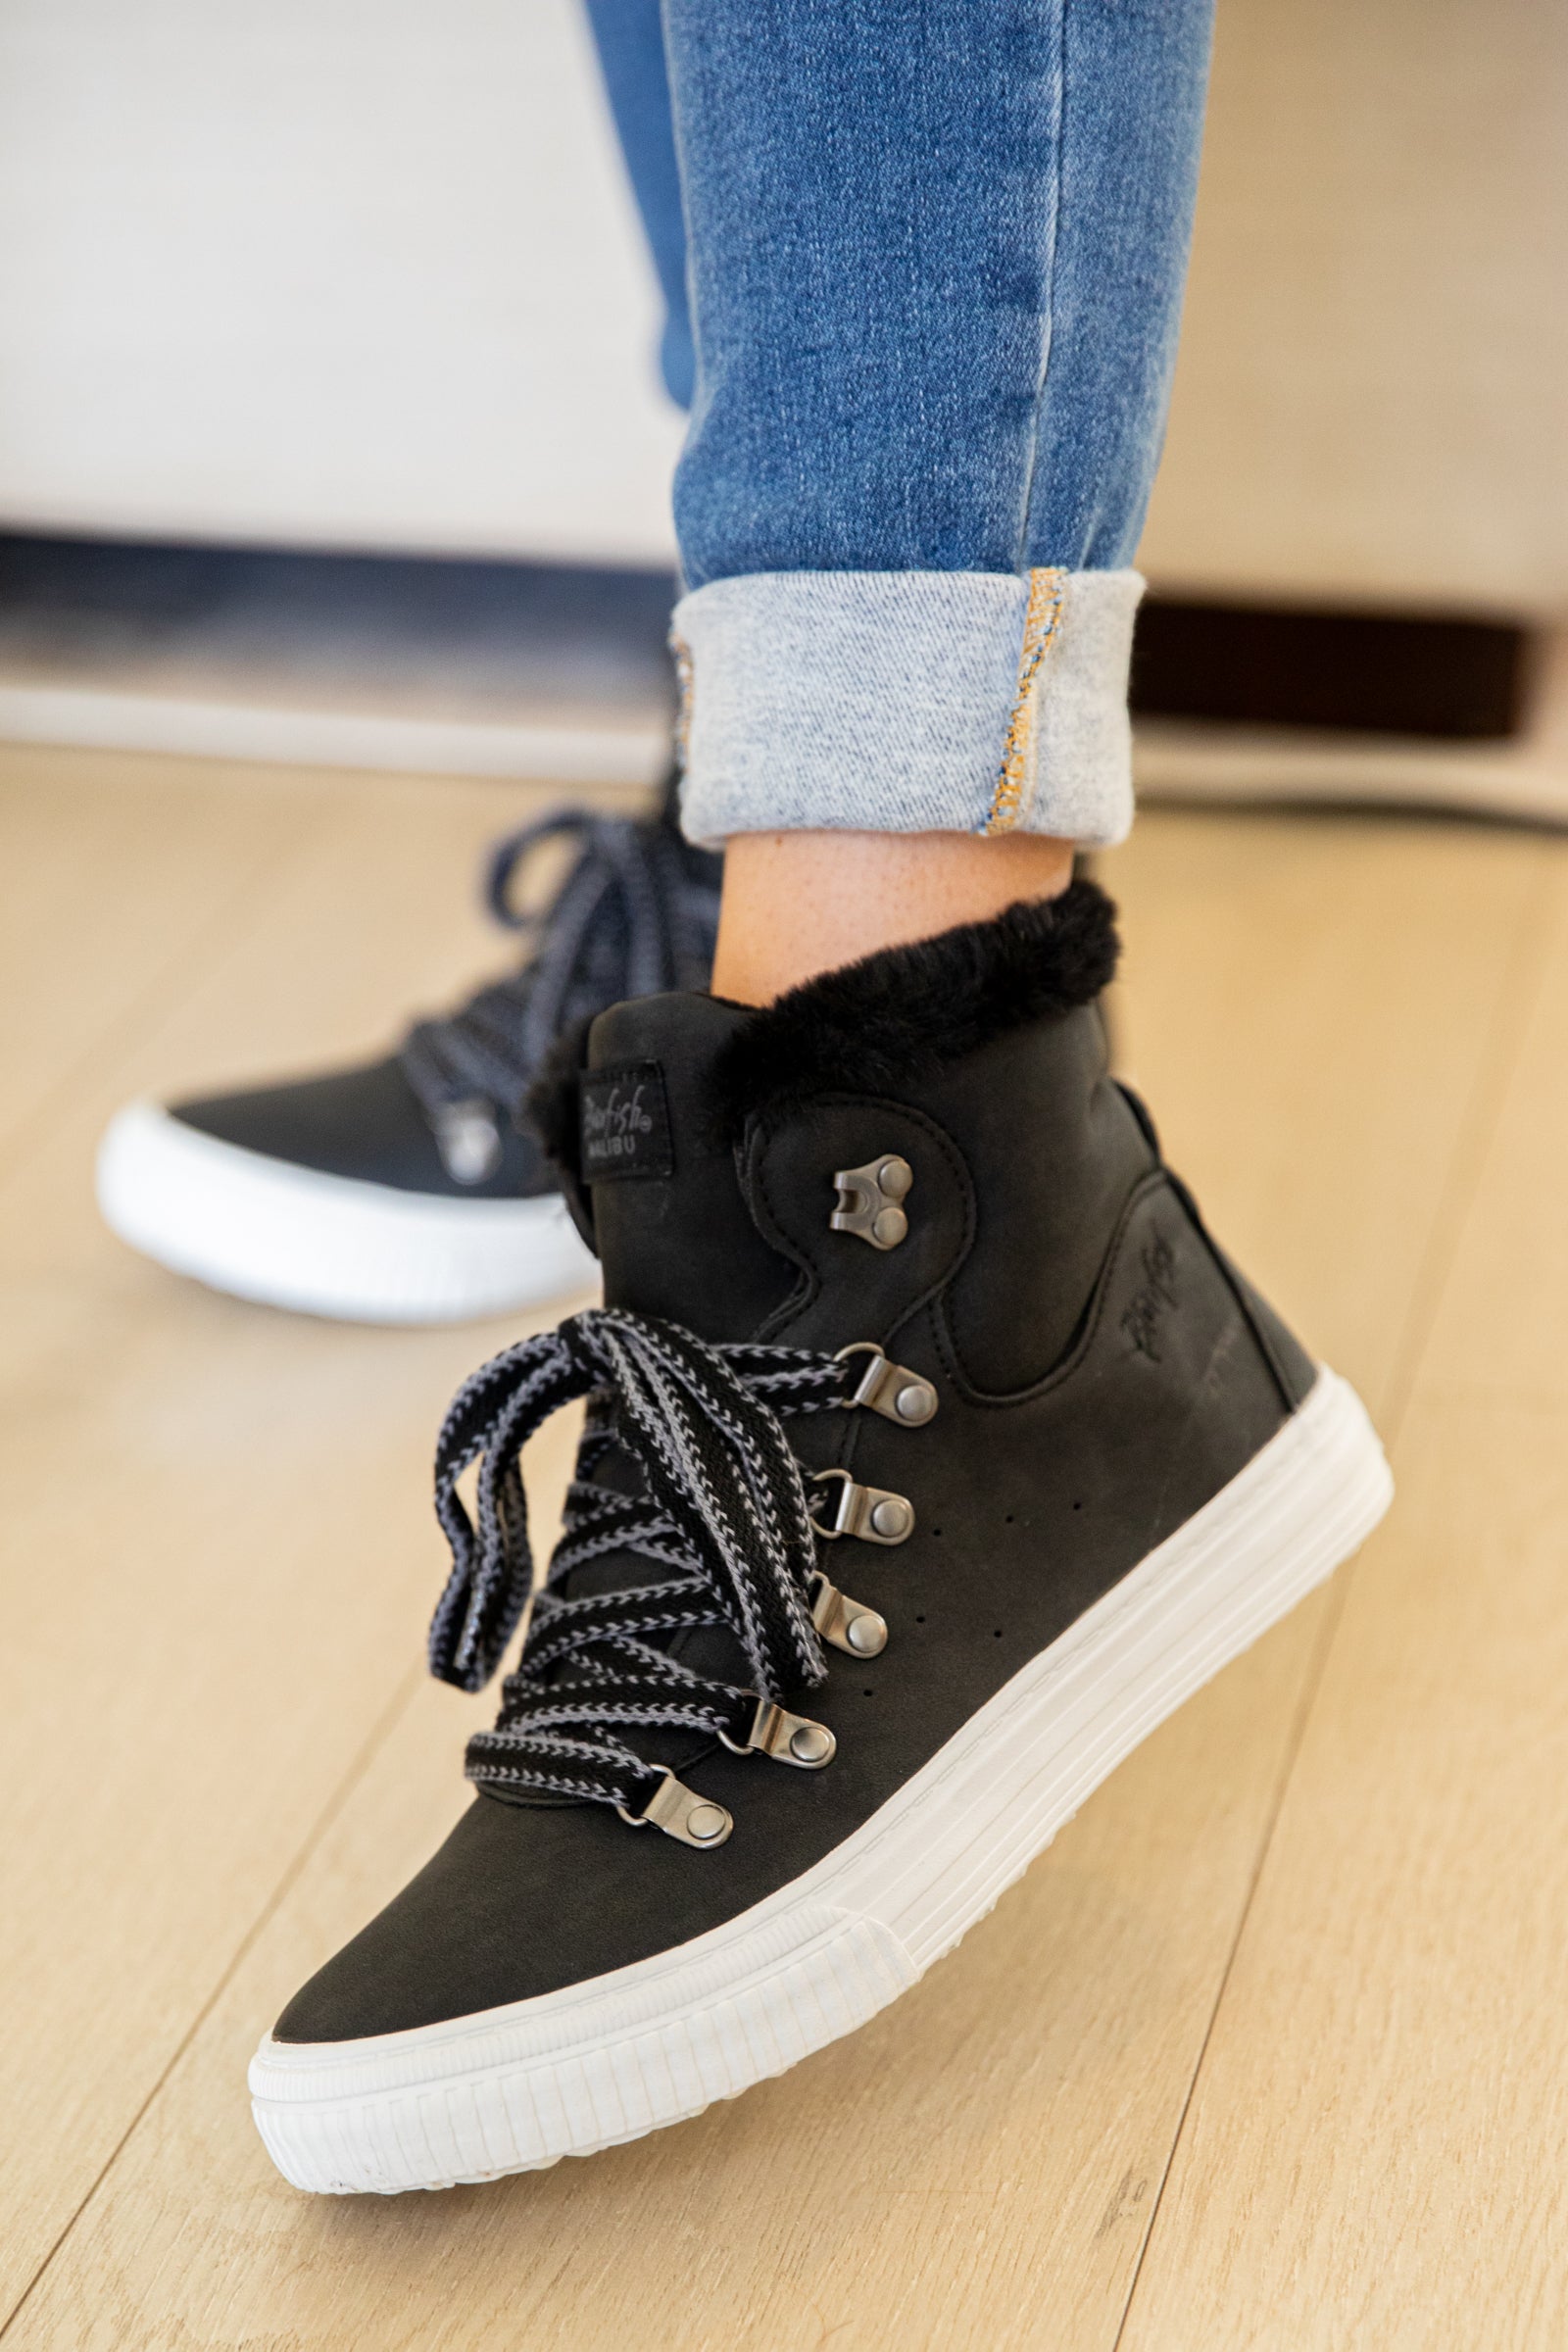 Black High Top Sneakers With Faux Fur Trim